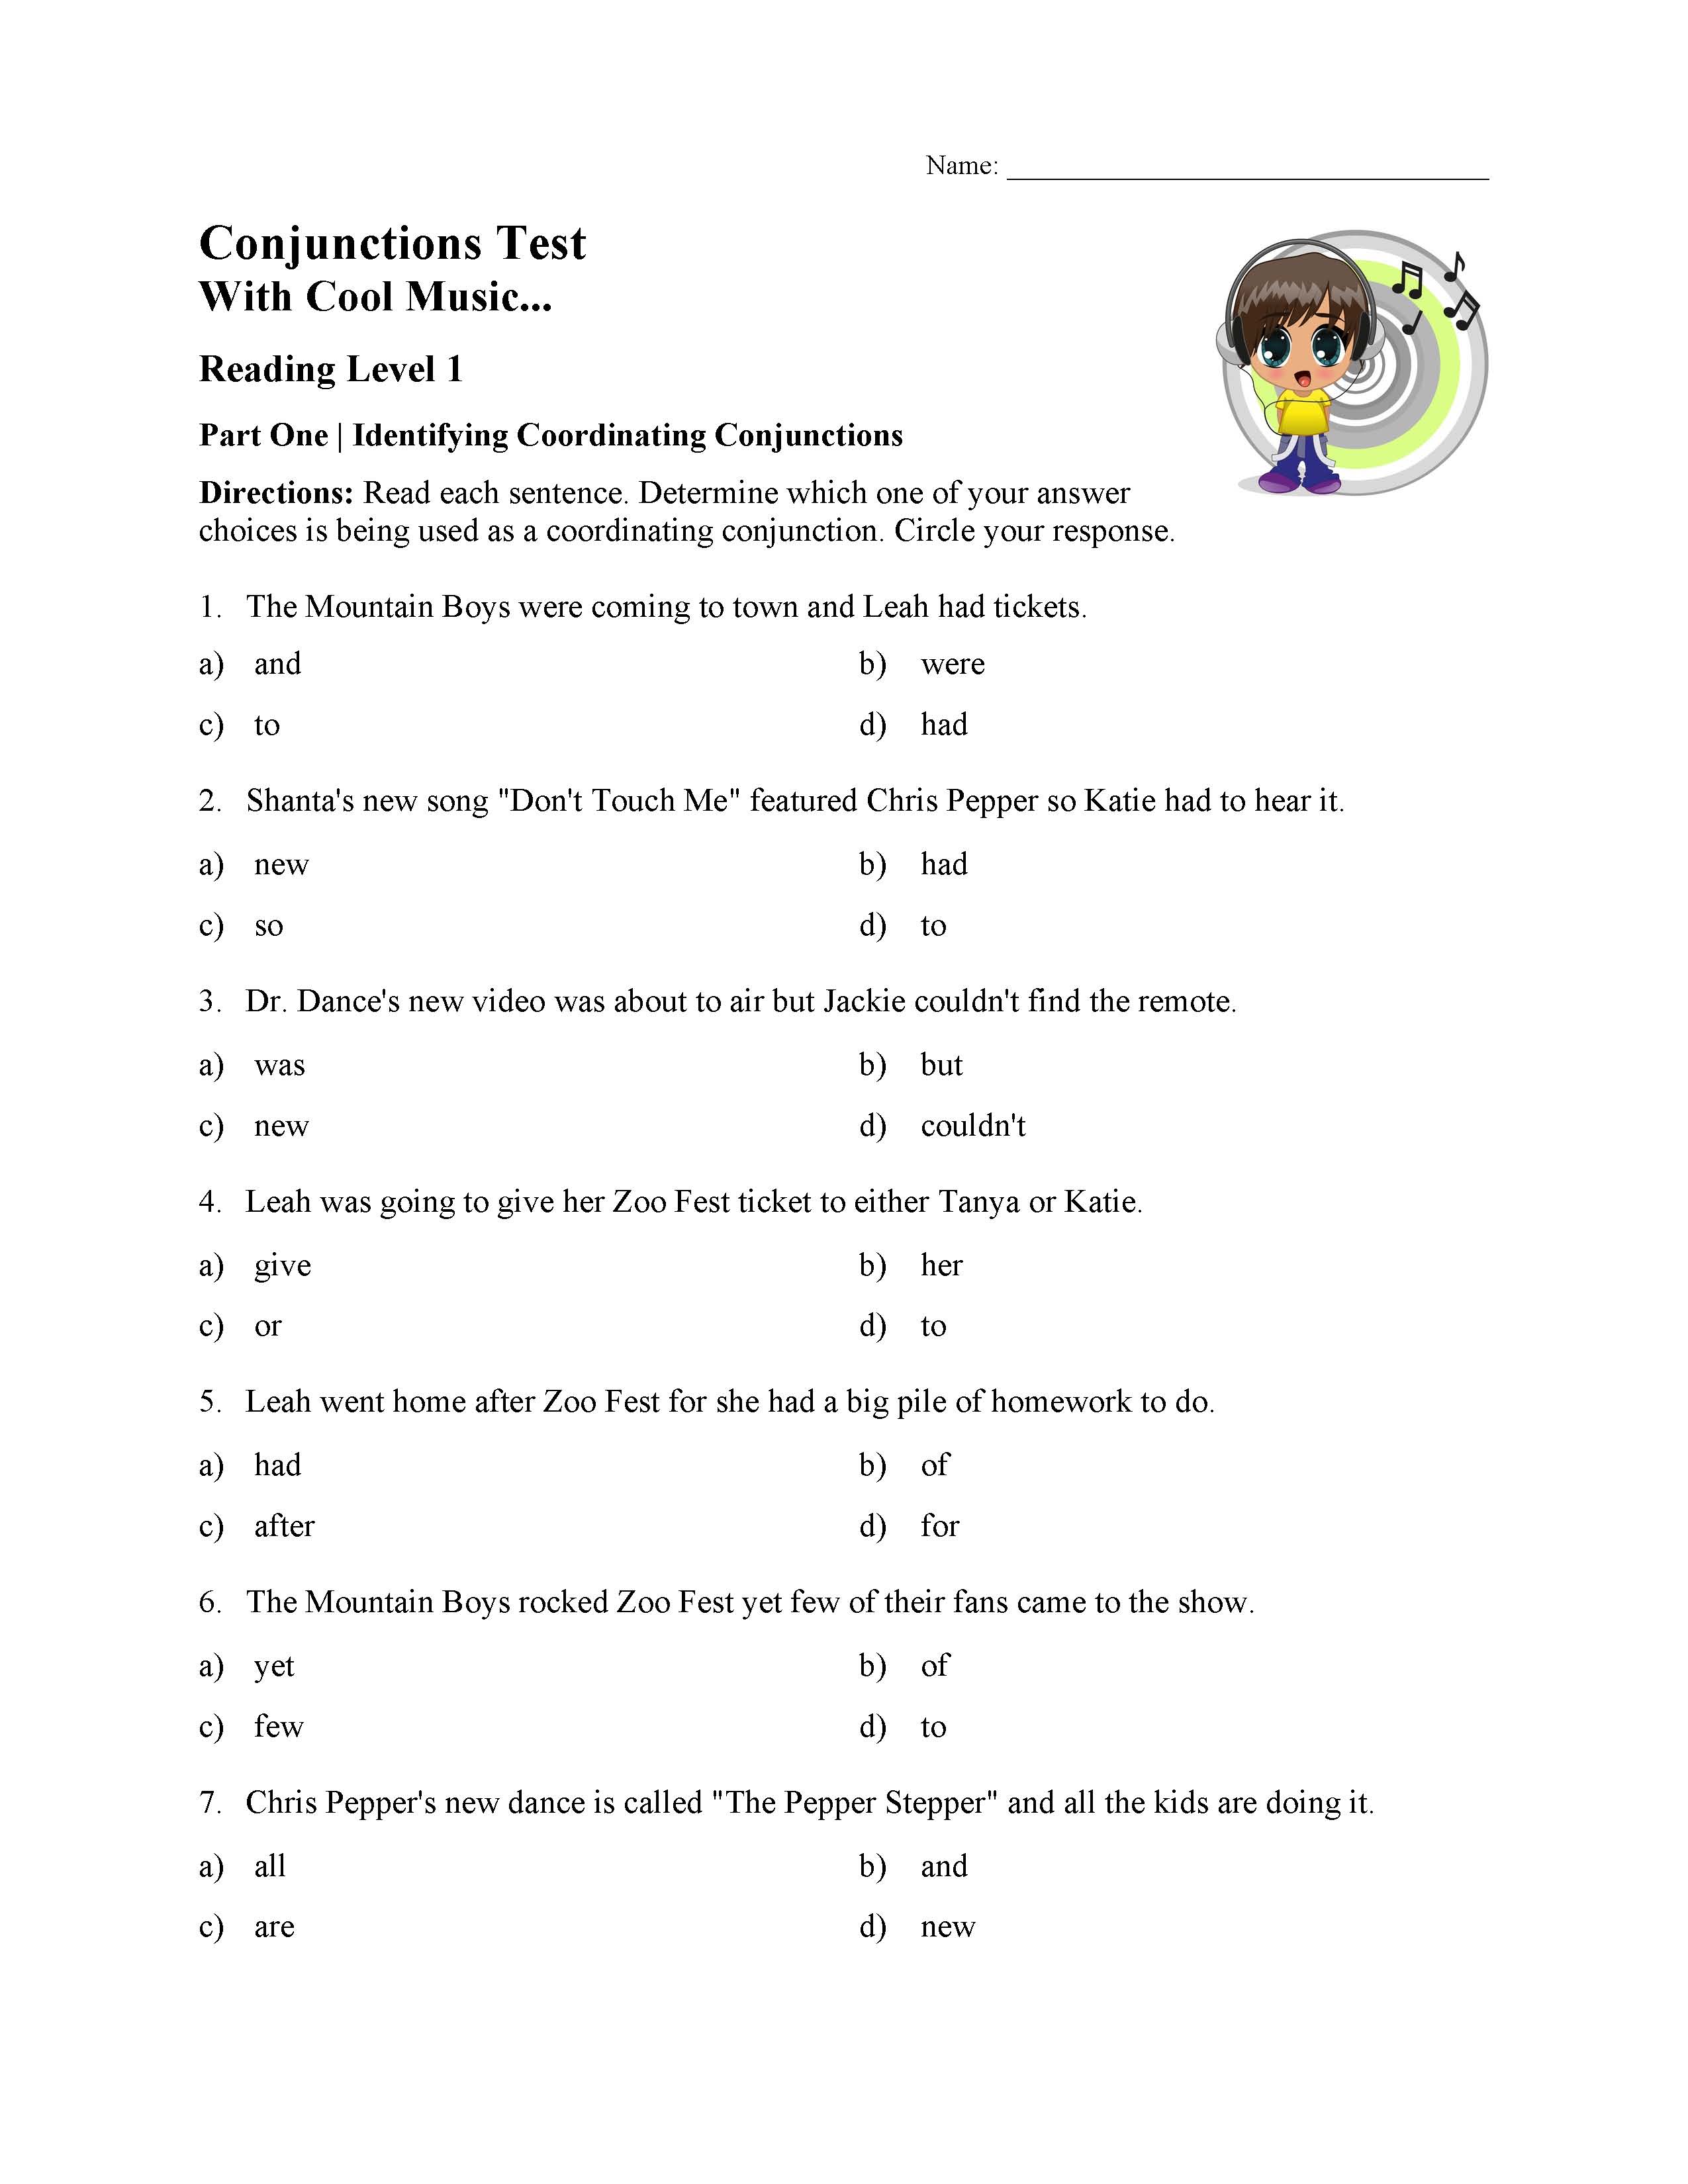 This is a preview image of the Conjunctions Test - Reading Level 1.